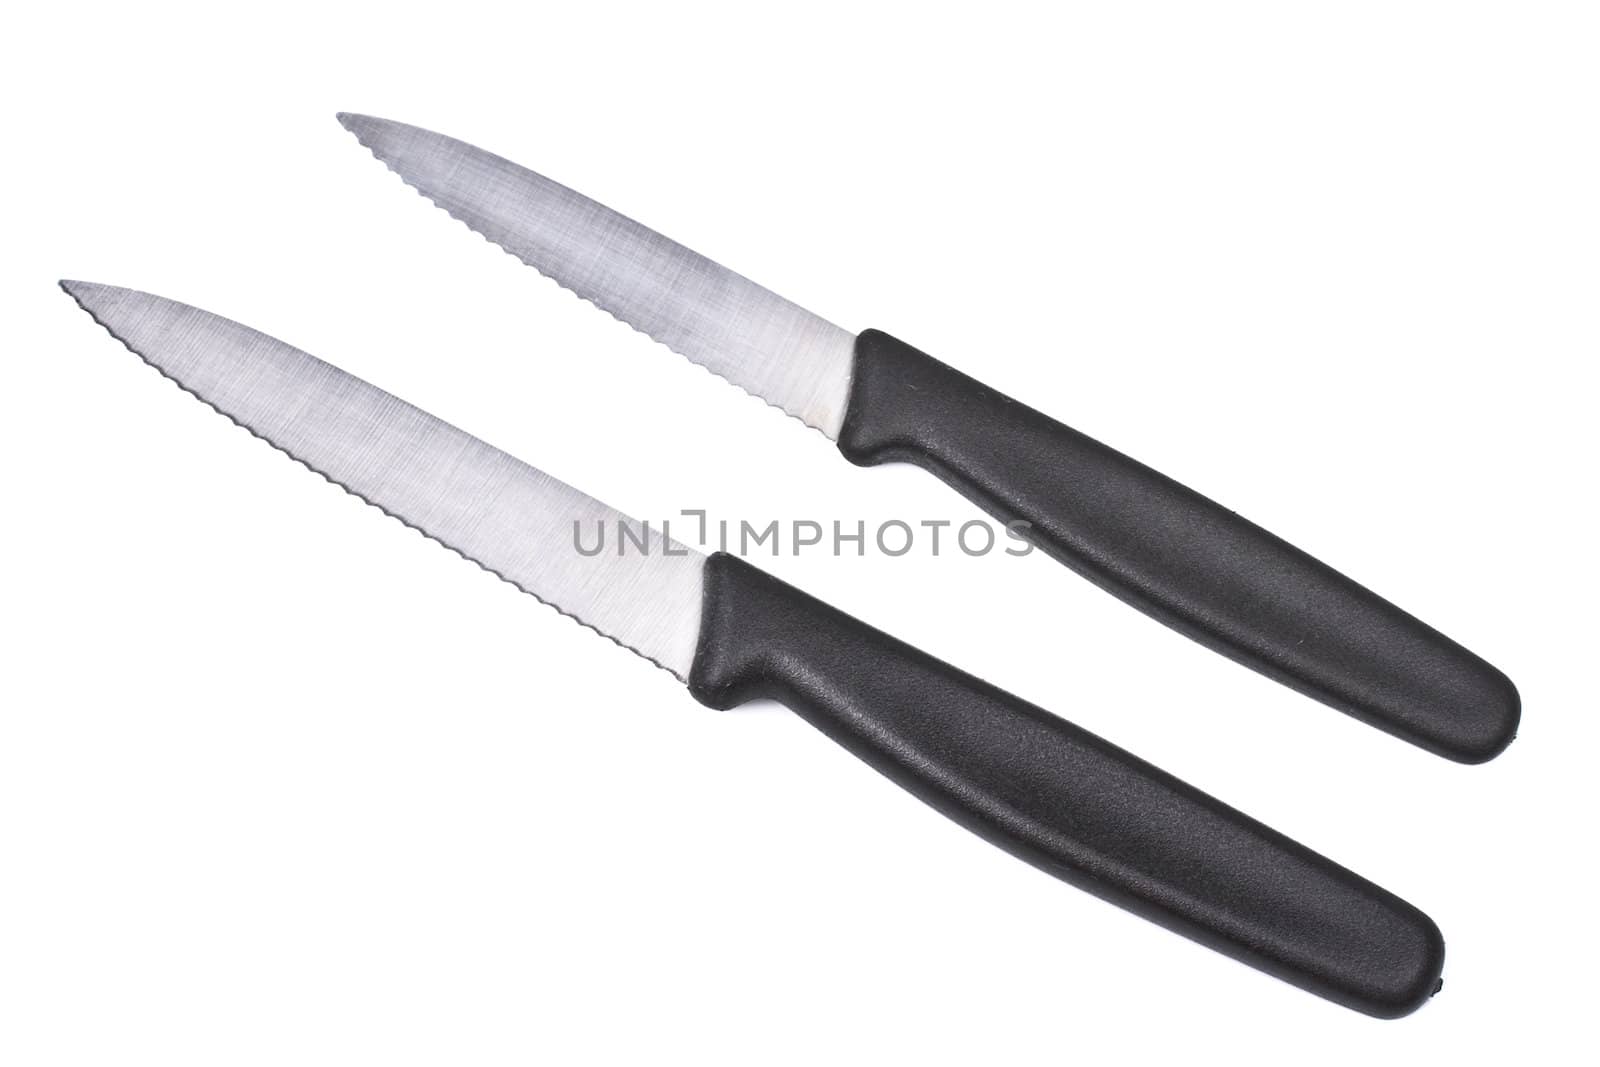 Two kitchen knives isolated on white background